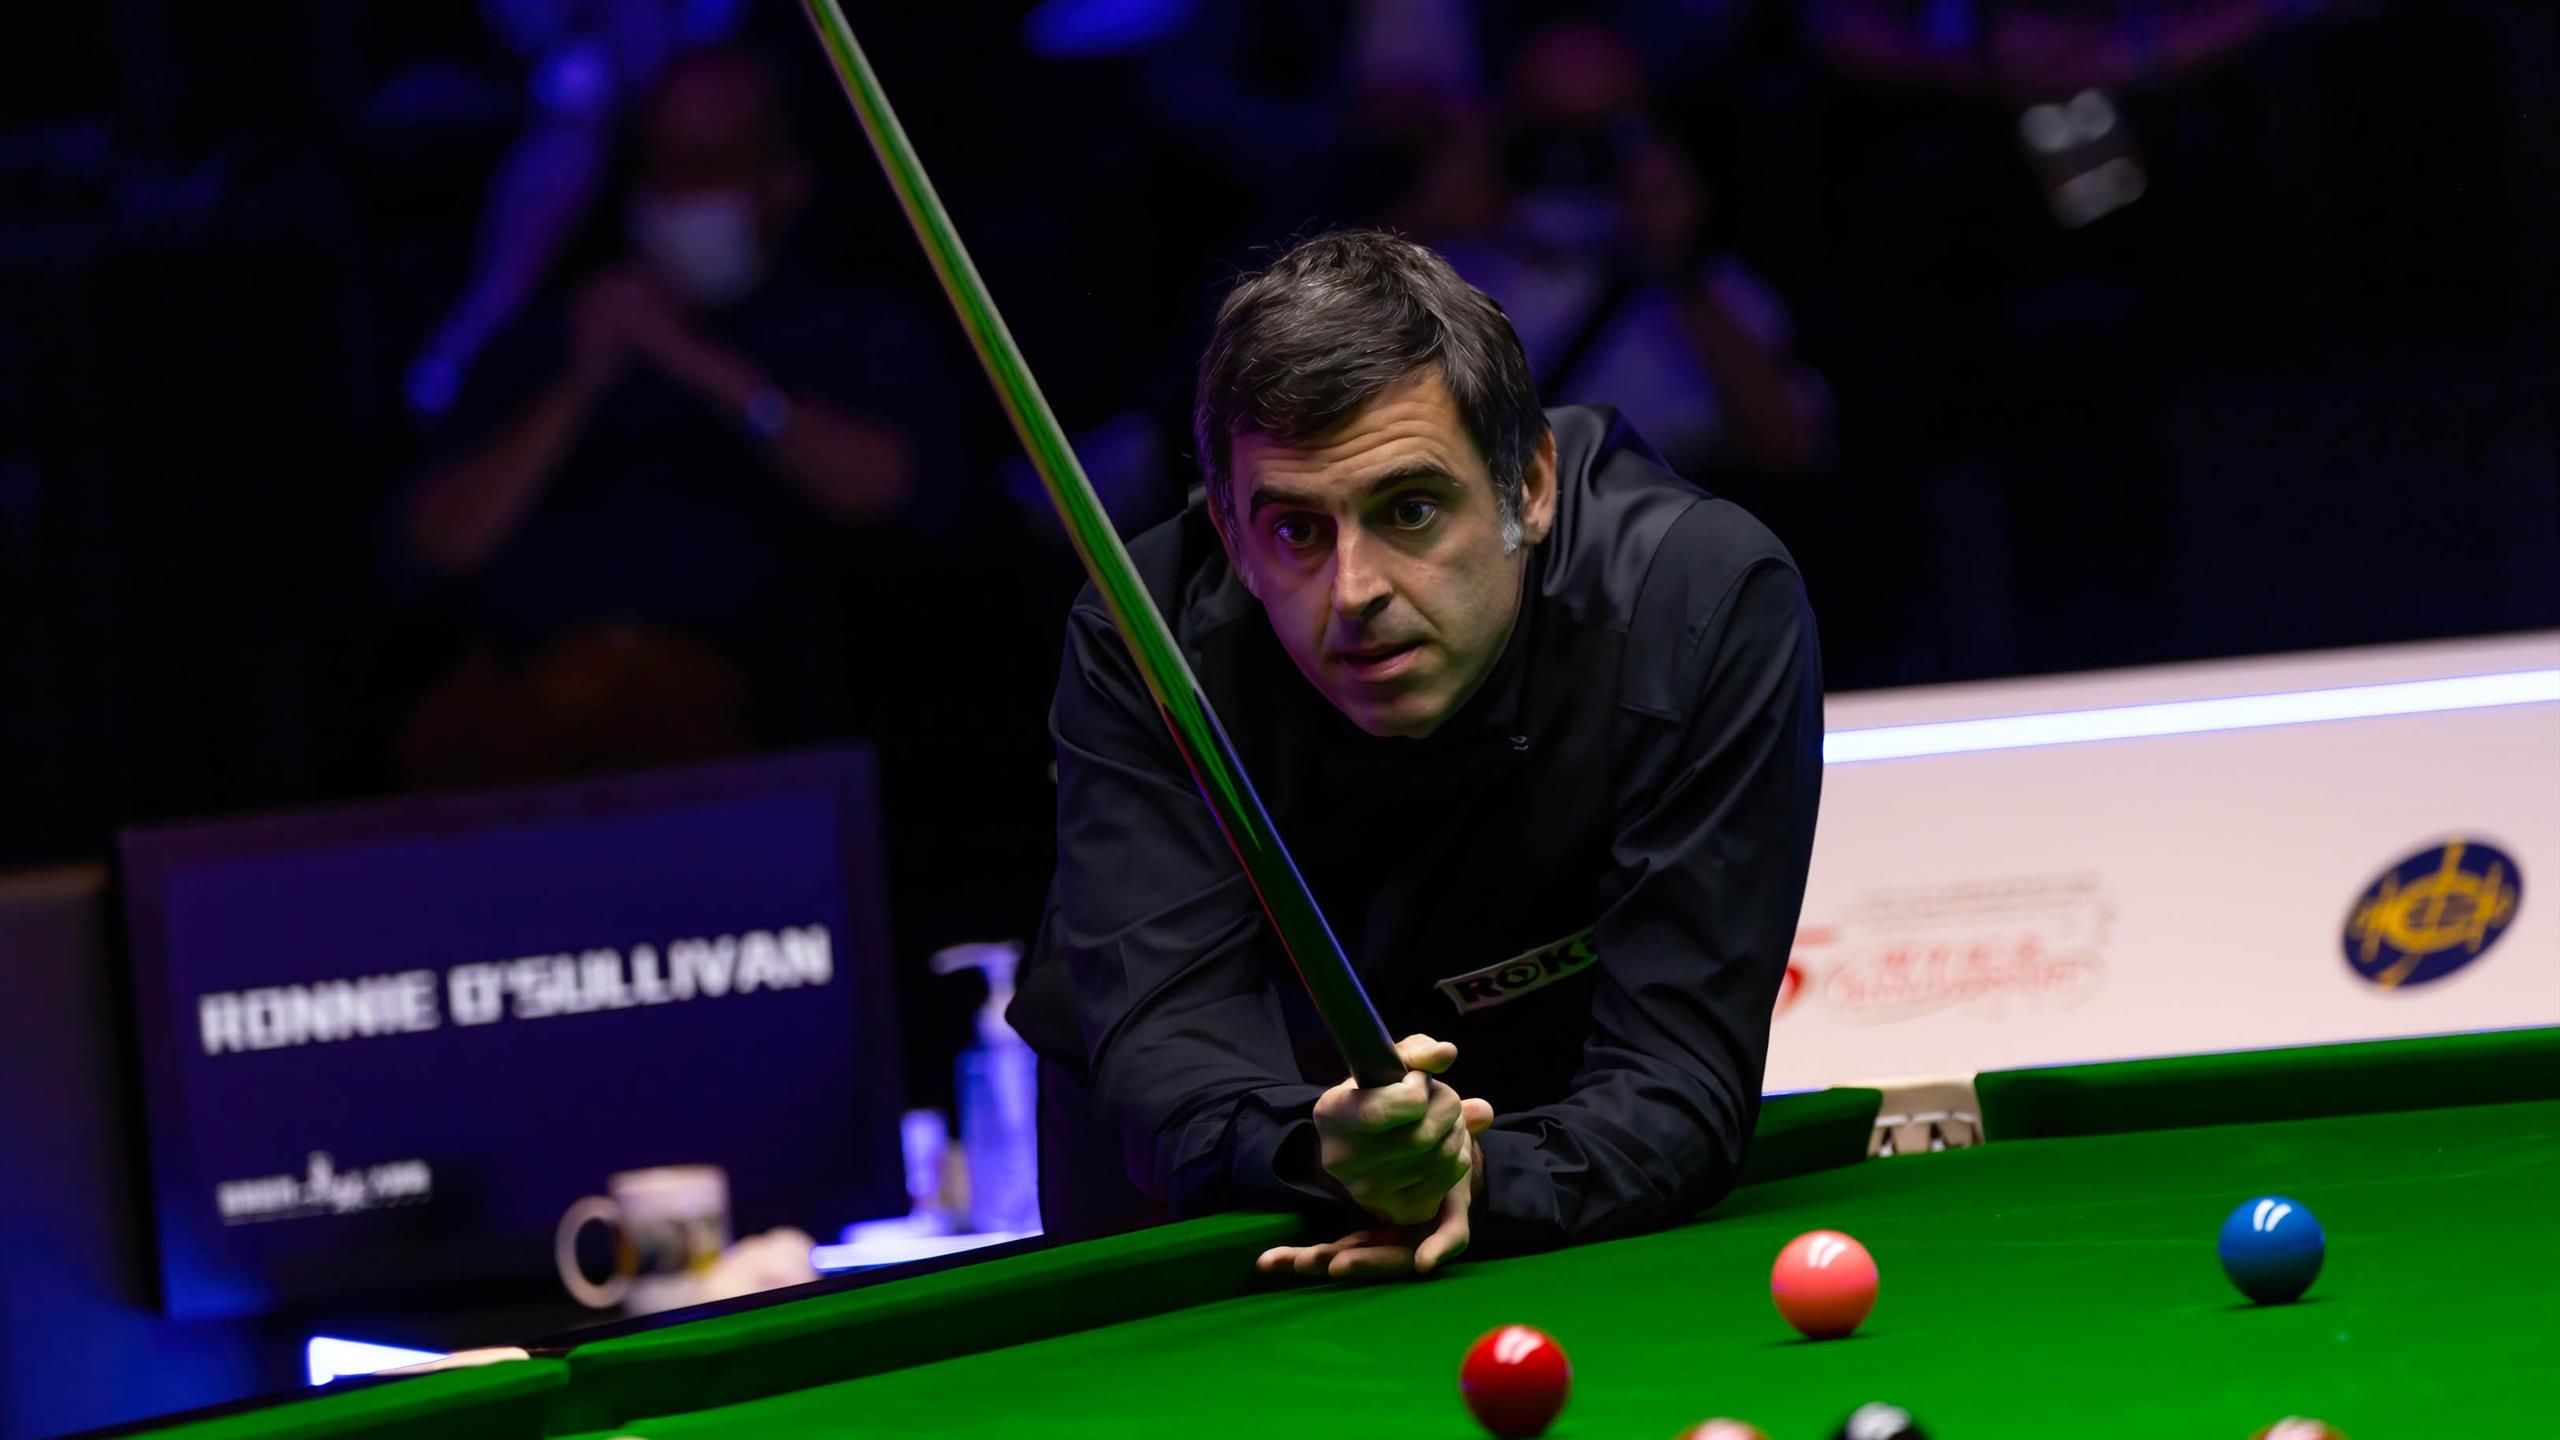 How to watch 2022 Champion of Champions, full draw, schedule as Ronnie OSullivan eyes fourth title